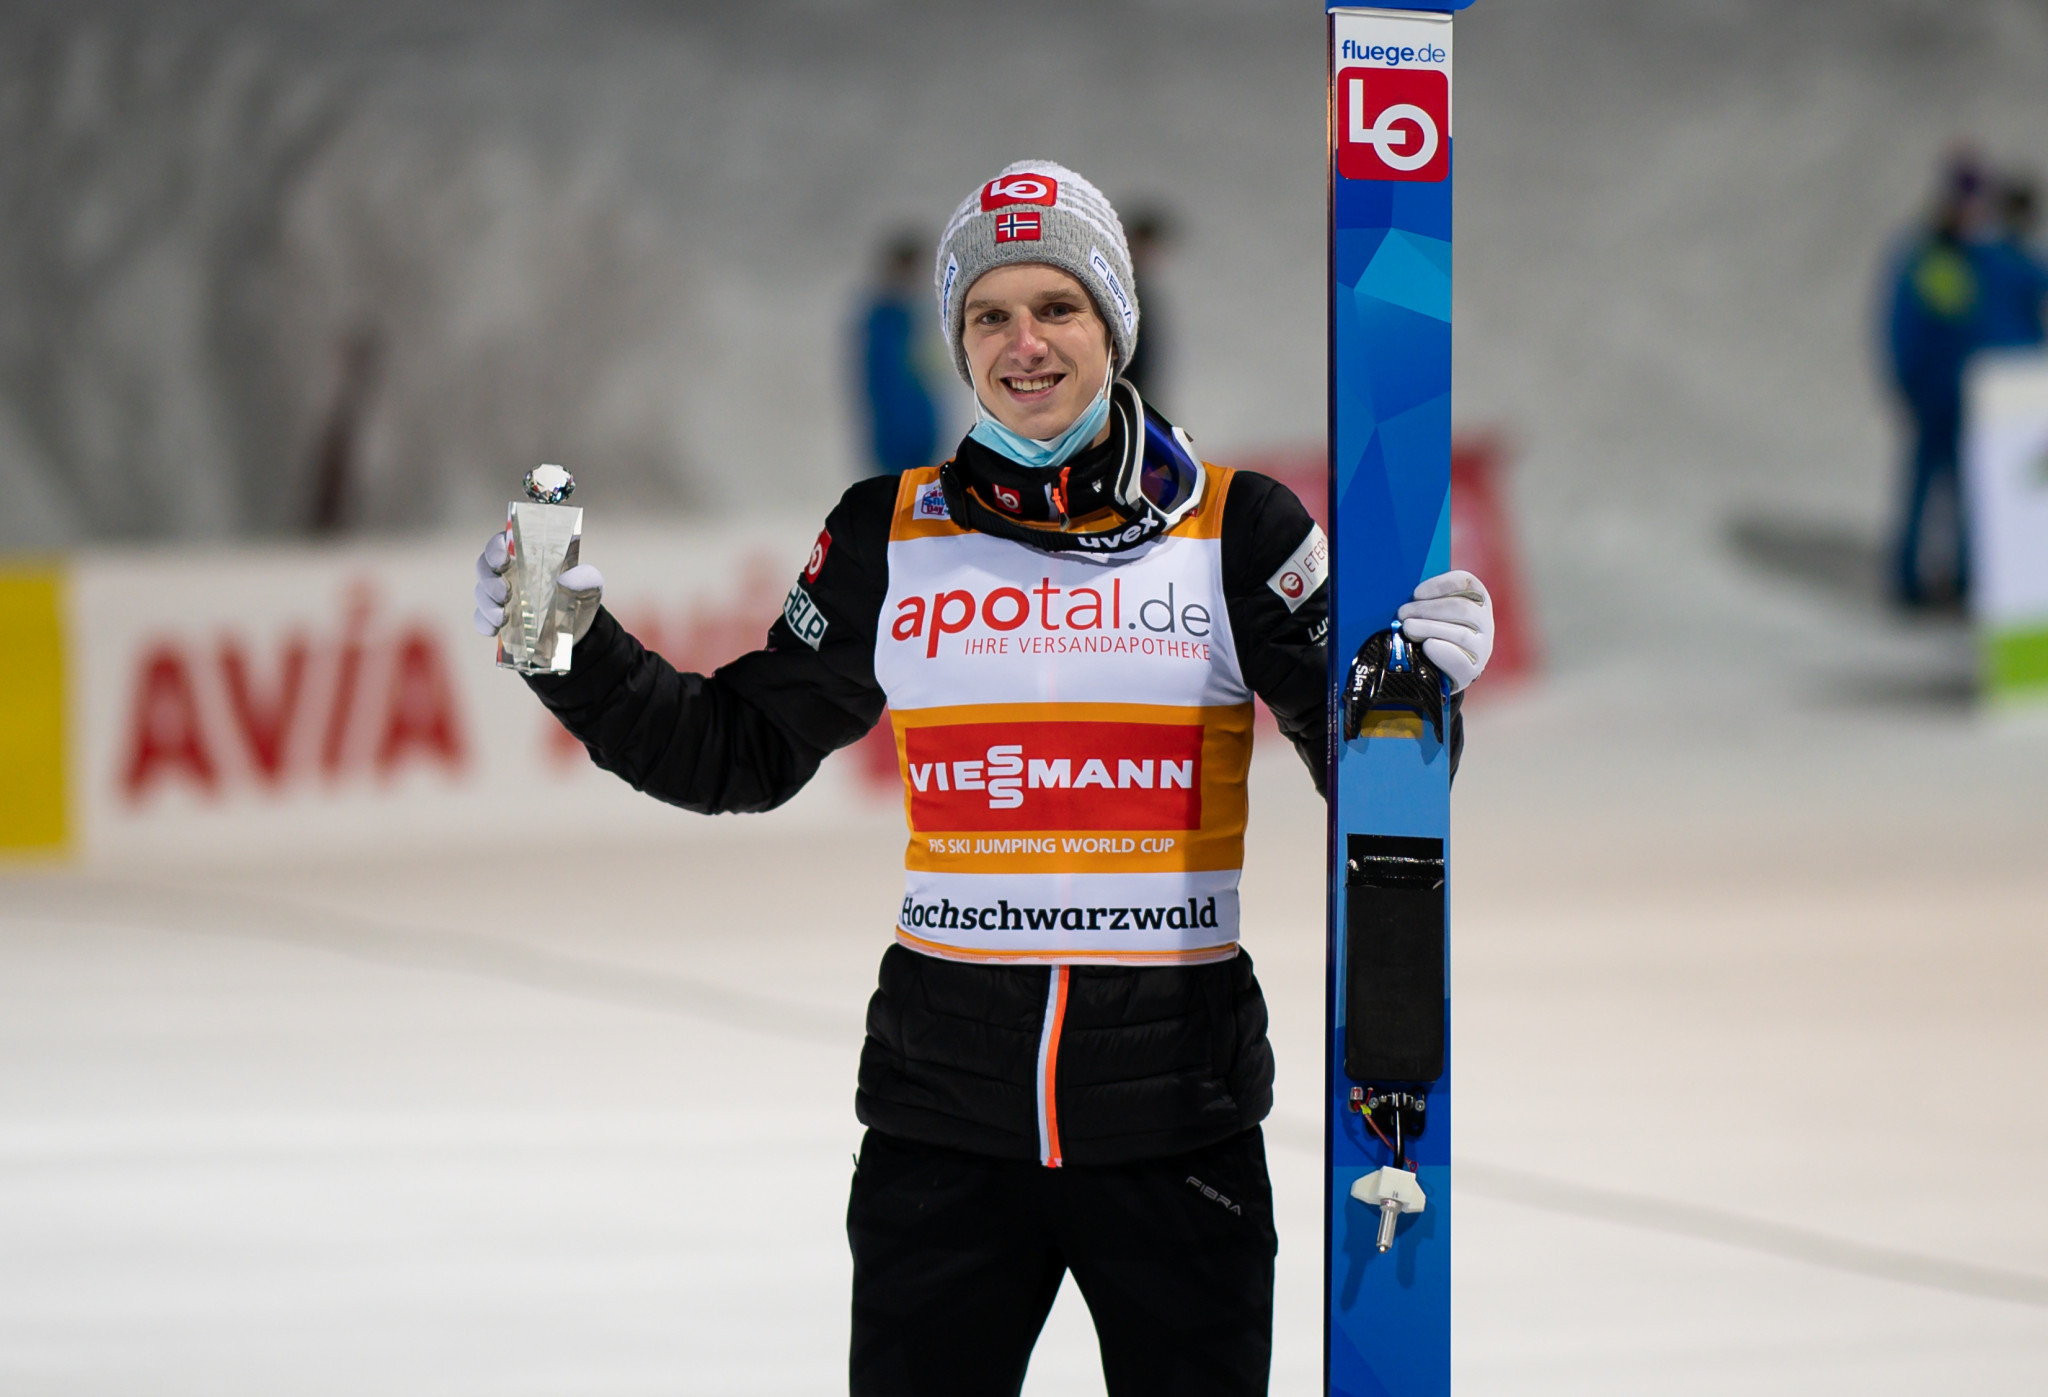 Granerud wins second day in Titisee-Neustadt at FIS Ski Jumping World Cup